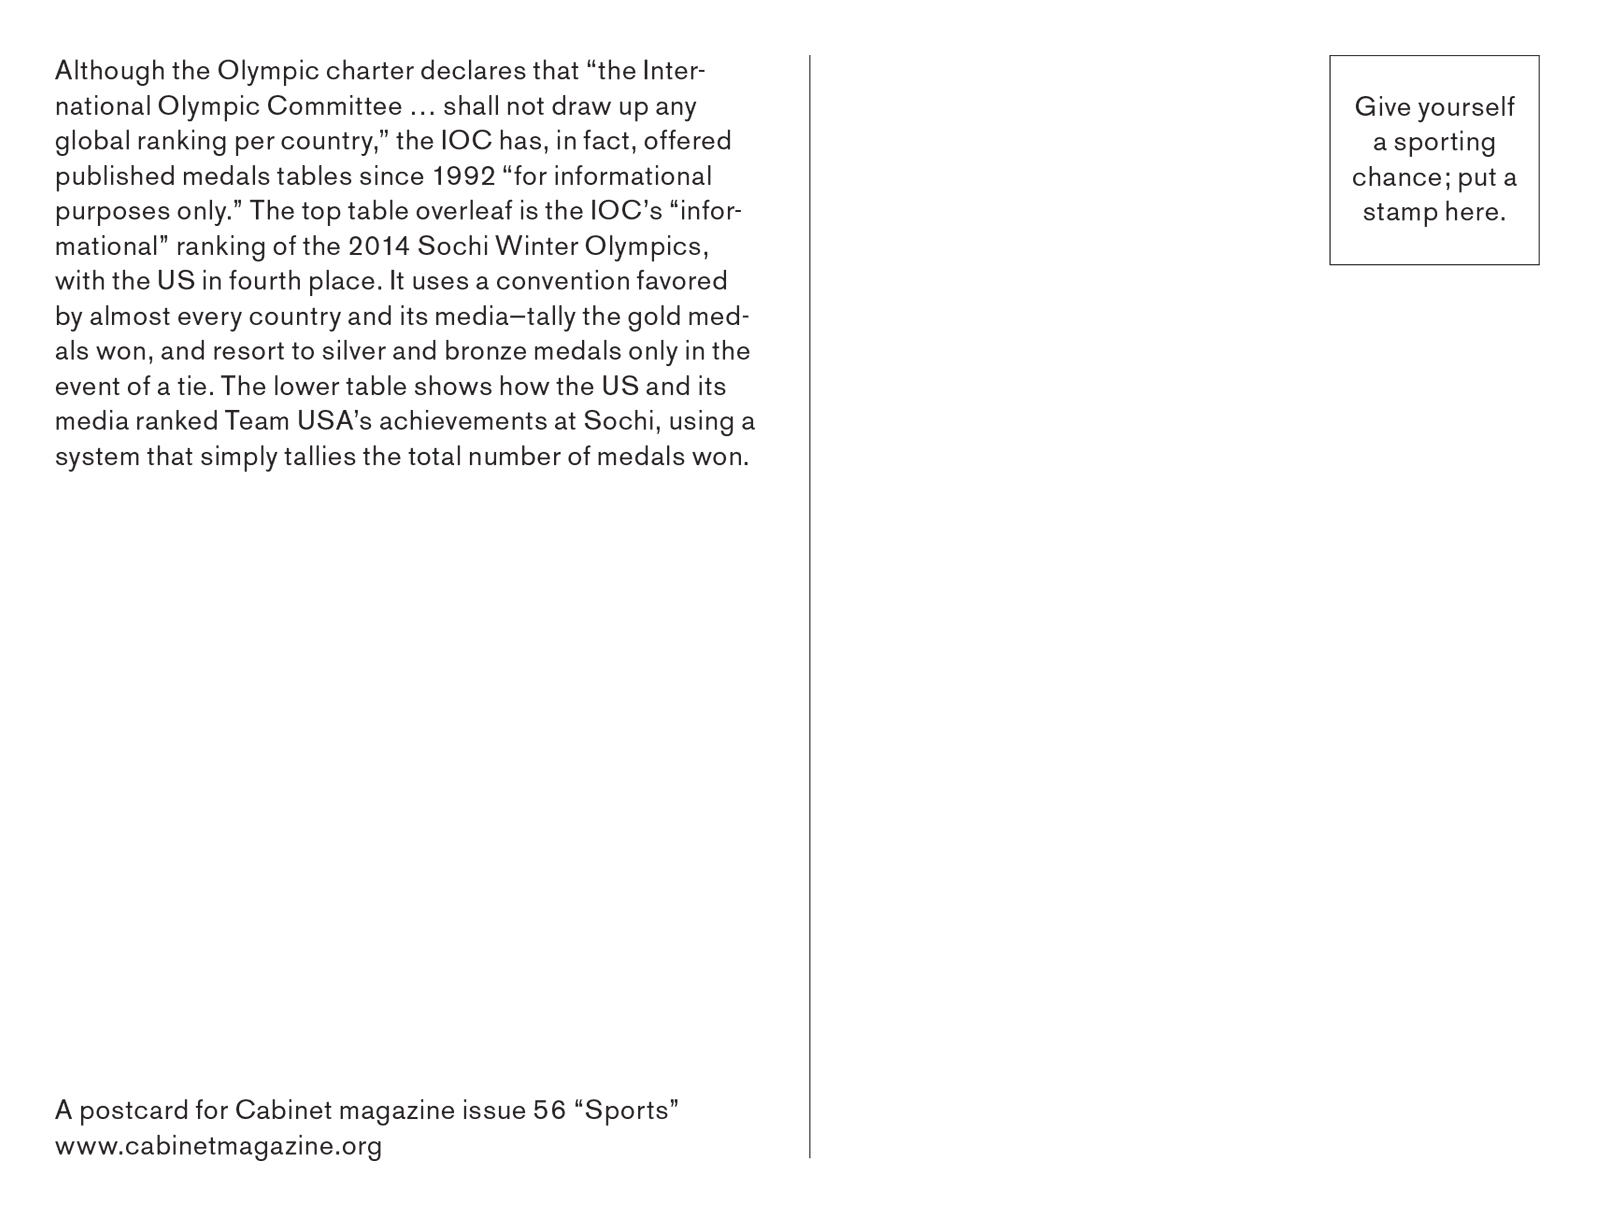 The back of the postcard reads “Although the Olympic charter declares that “the International Olympic Committee shall not draw up any global ranking per country,” the IOC has, in fact, offered published medals tables since 1992 “for informational purposes only.” The top table overleaf is the IOC’s “informational” ranking of the 2014 Sochi Winter Olympics, with the US in fourth place. It uses a convention favored by almost every country and its media—tally the gold med  als won, and resort to silver and bronze medals only in the event of a tie. The lower table shows how the US and its media ranked Team USA’s achievements at Sochi, using a system that simply tallies the total number of medals won.”